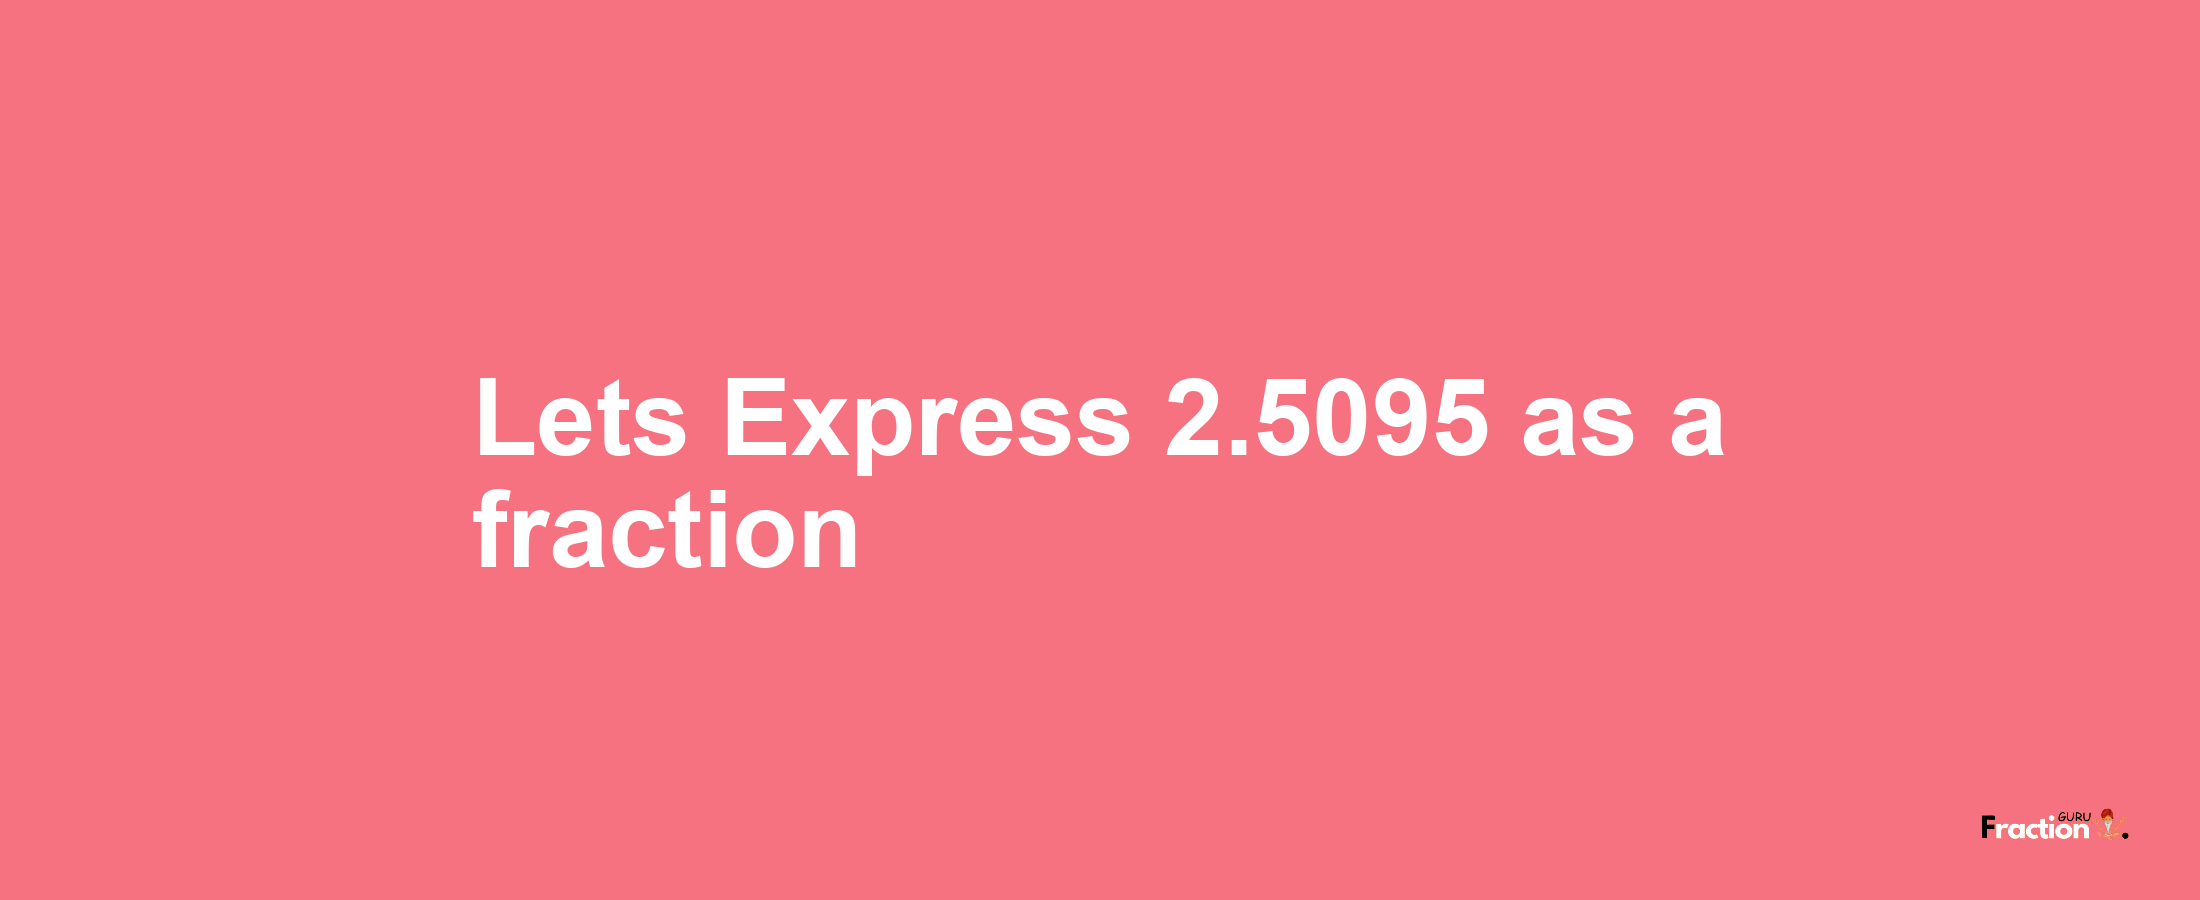 Lets Express 2.5095 as afraction